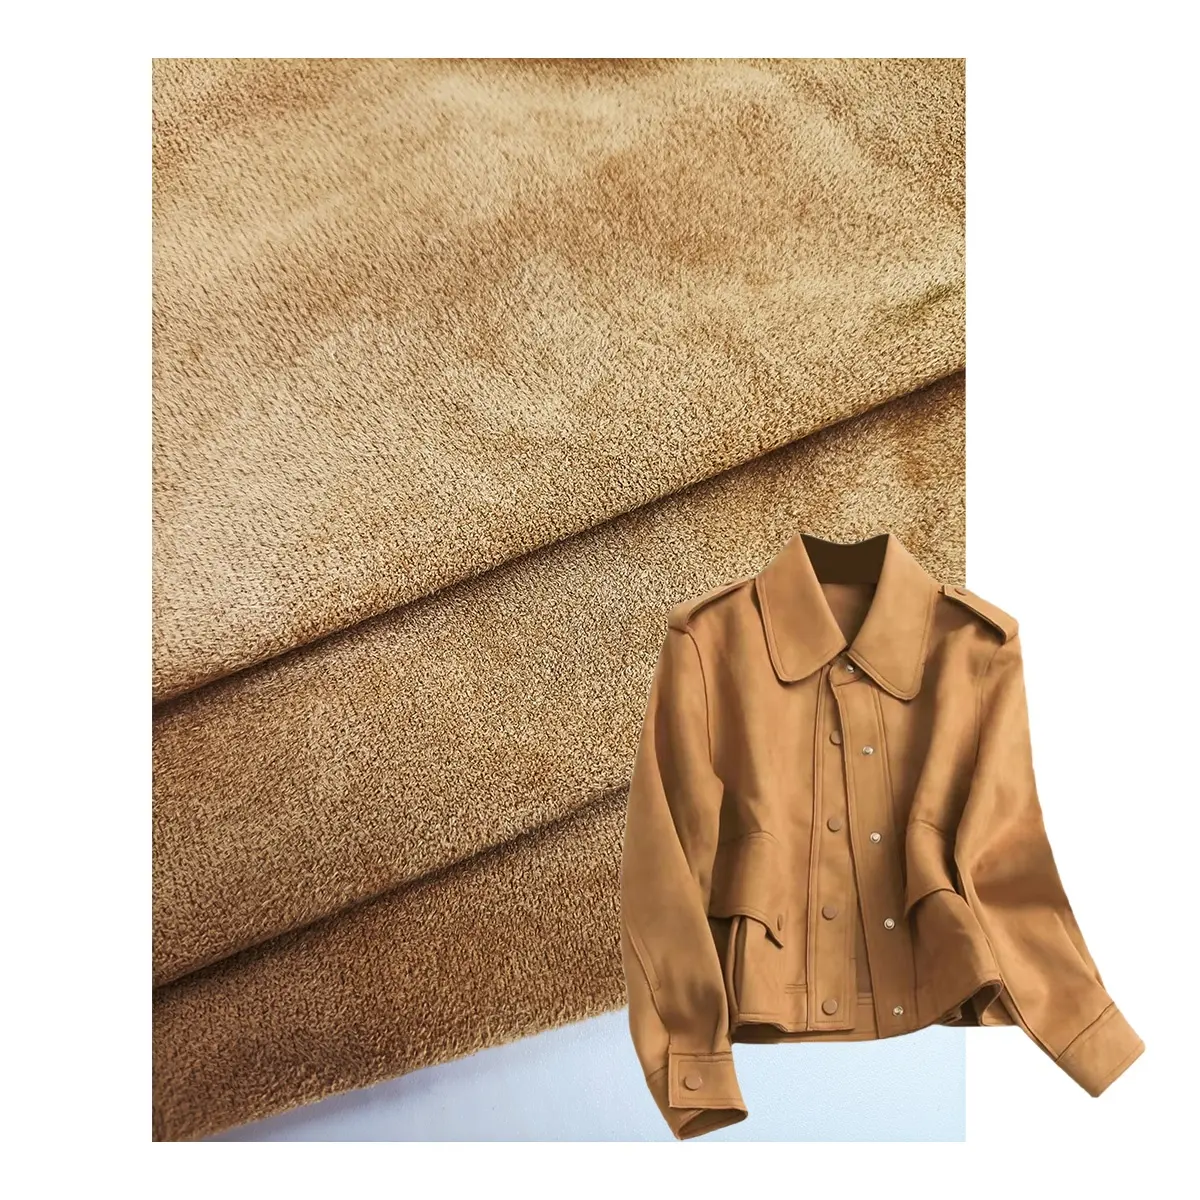 NO MOQ 280 gsm Microfiber suede fabric very soft and smooth suede for bags boots shoes coat textile